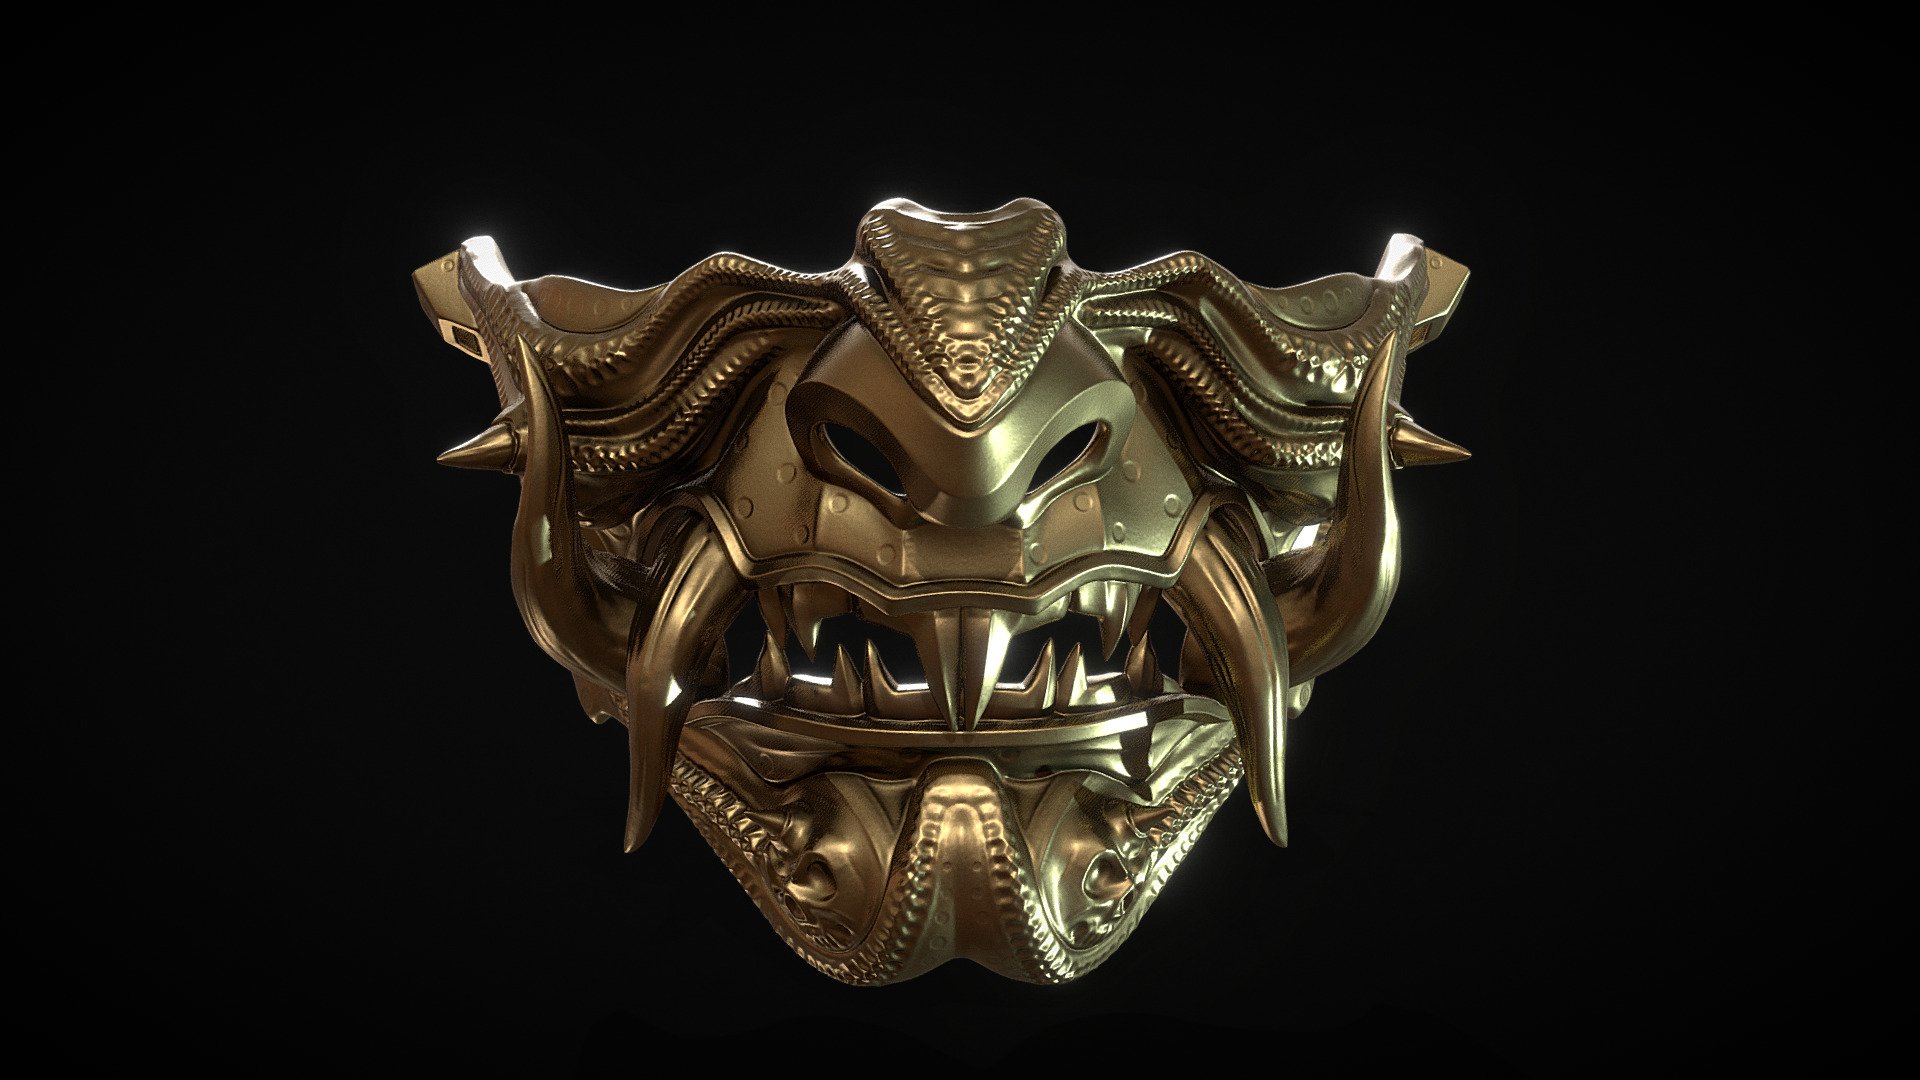 Samurai masks, called mempo, were facial armor worn by Japanese Samurai warriors. They were made out of leather and iron and were designed not only to protect the warrior's face but also intimidate their enemies.


Watertight #STL
3X versions: 250k ,500k &amp; 1000k polygons

Let me know if you have any issues.

Enjoy!

Several chenges.

Base mesh: &ldquo;Samurai Mask Model 3